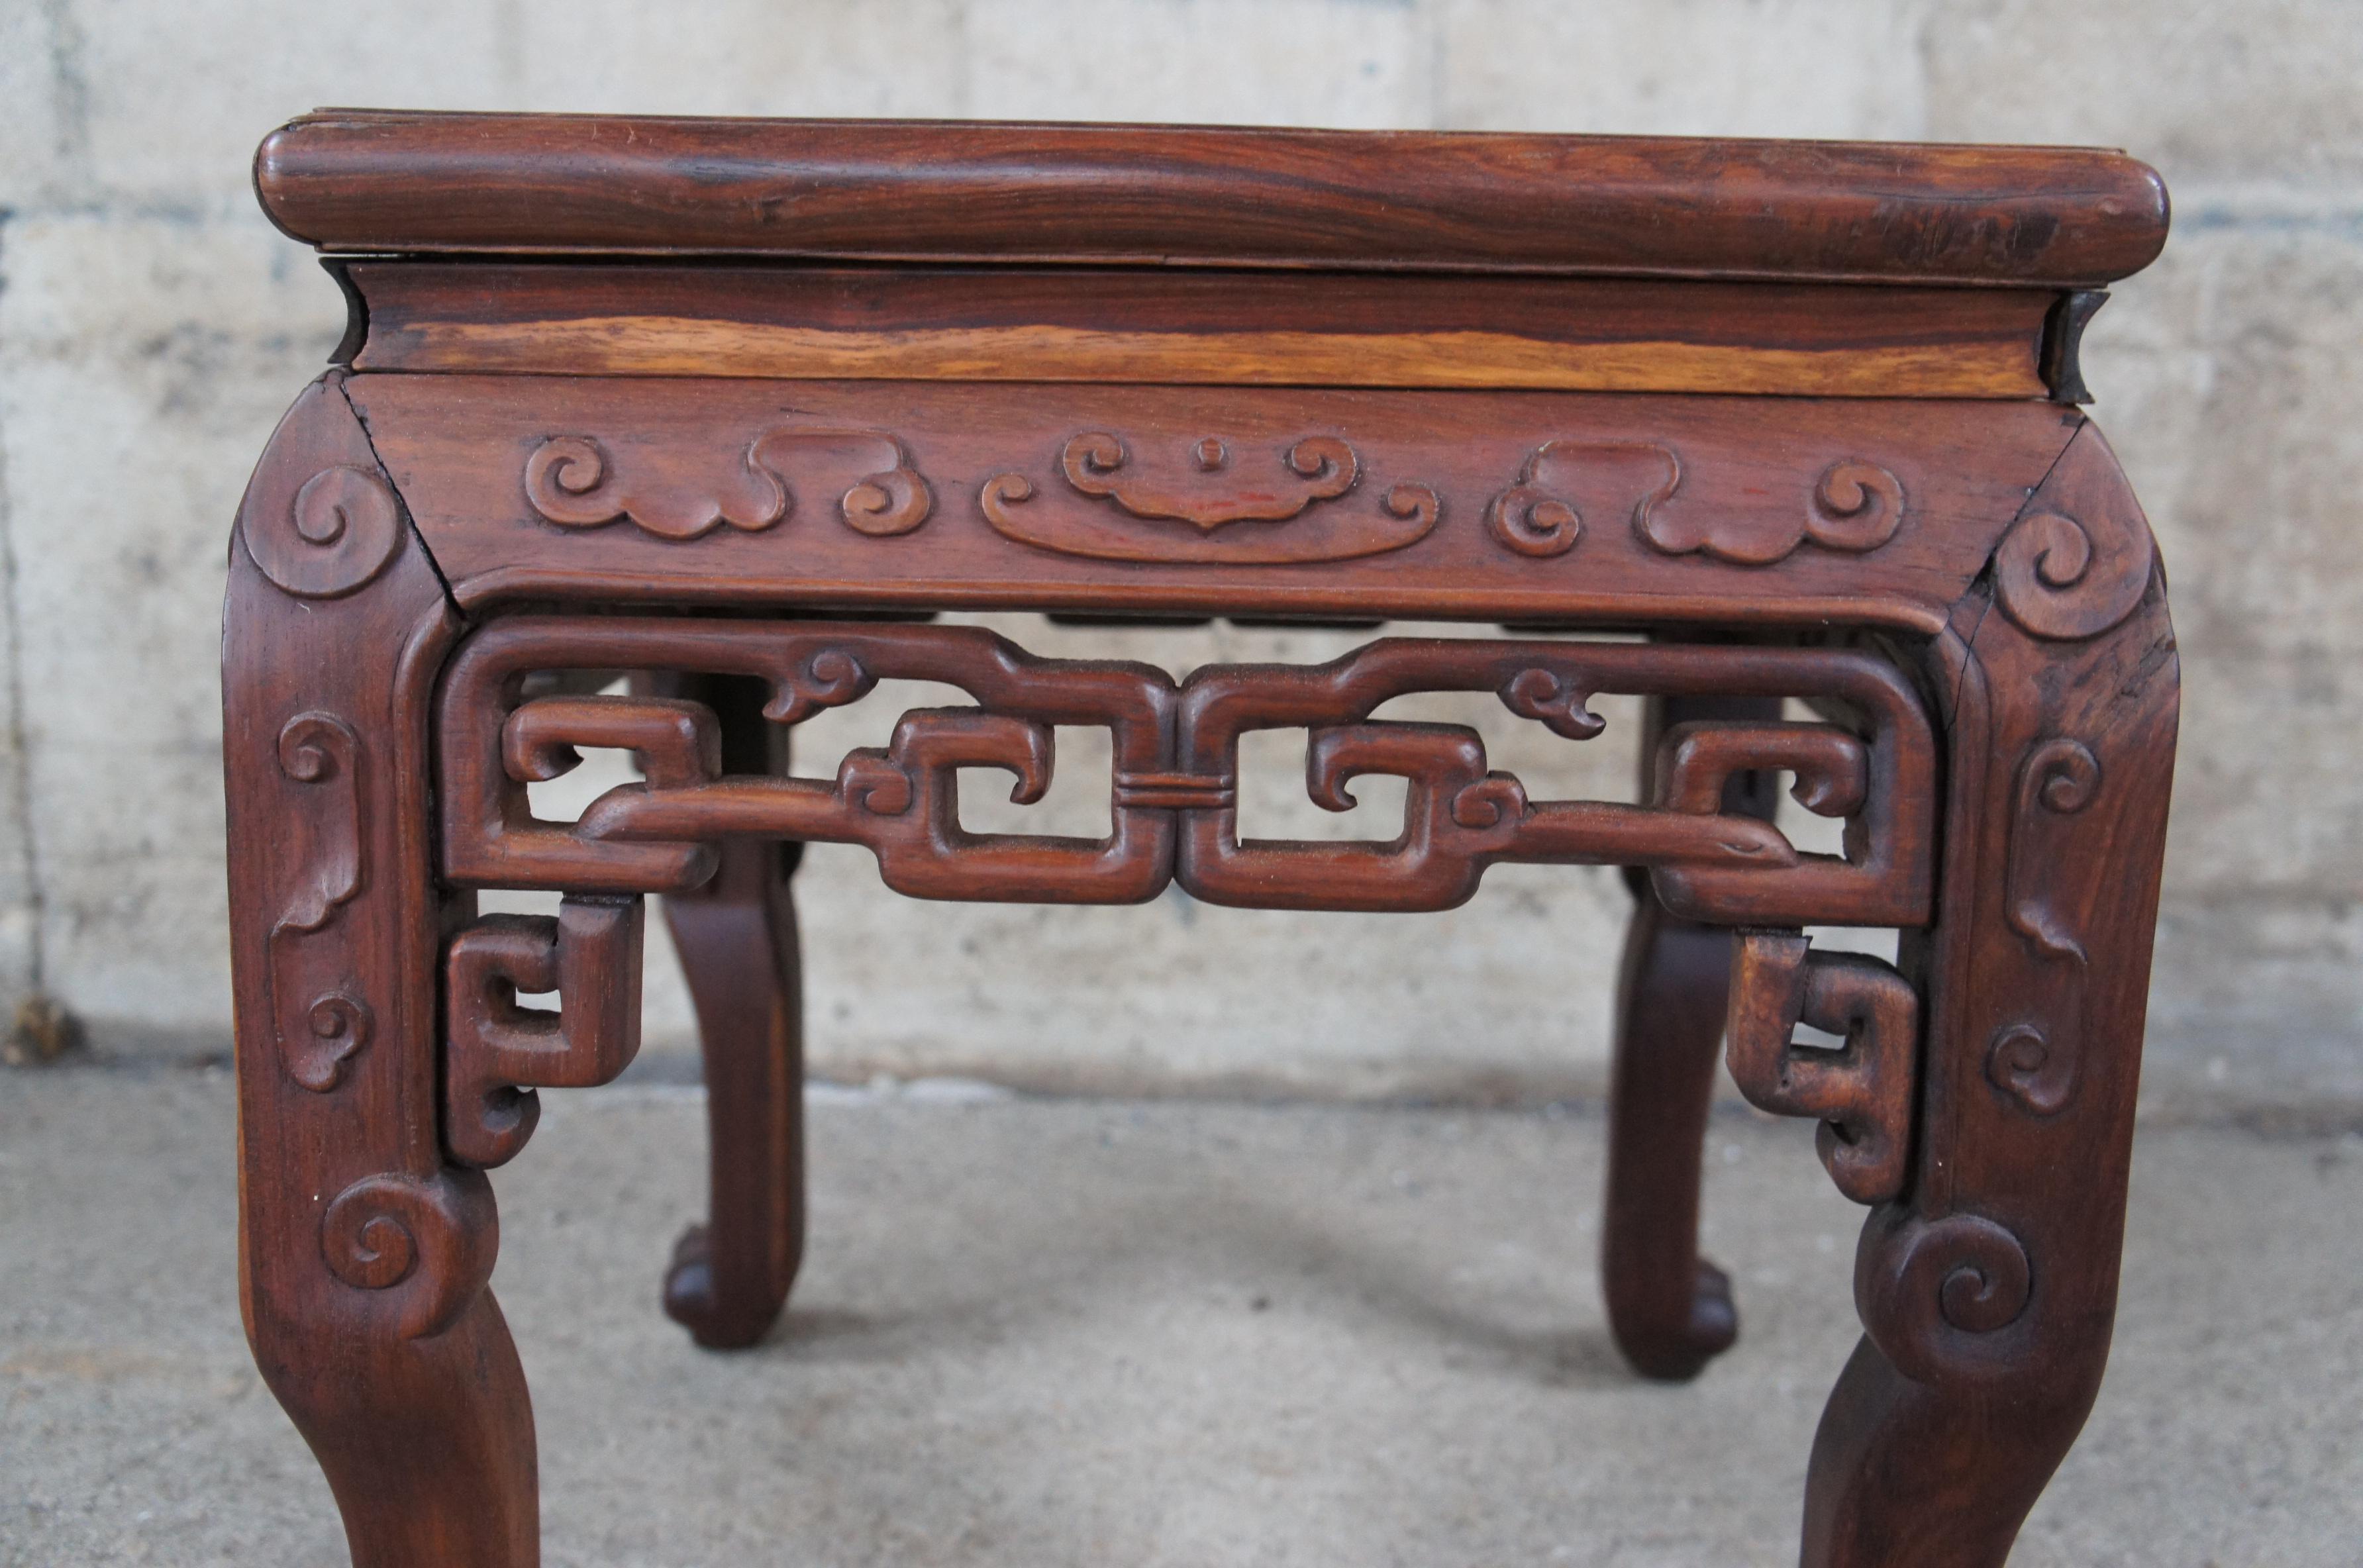 20th Century Antique Chinese Rosewood Carved Marble Top Side Table Stool Plant Stand Pedestal For Sale